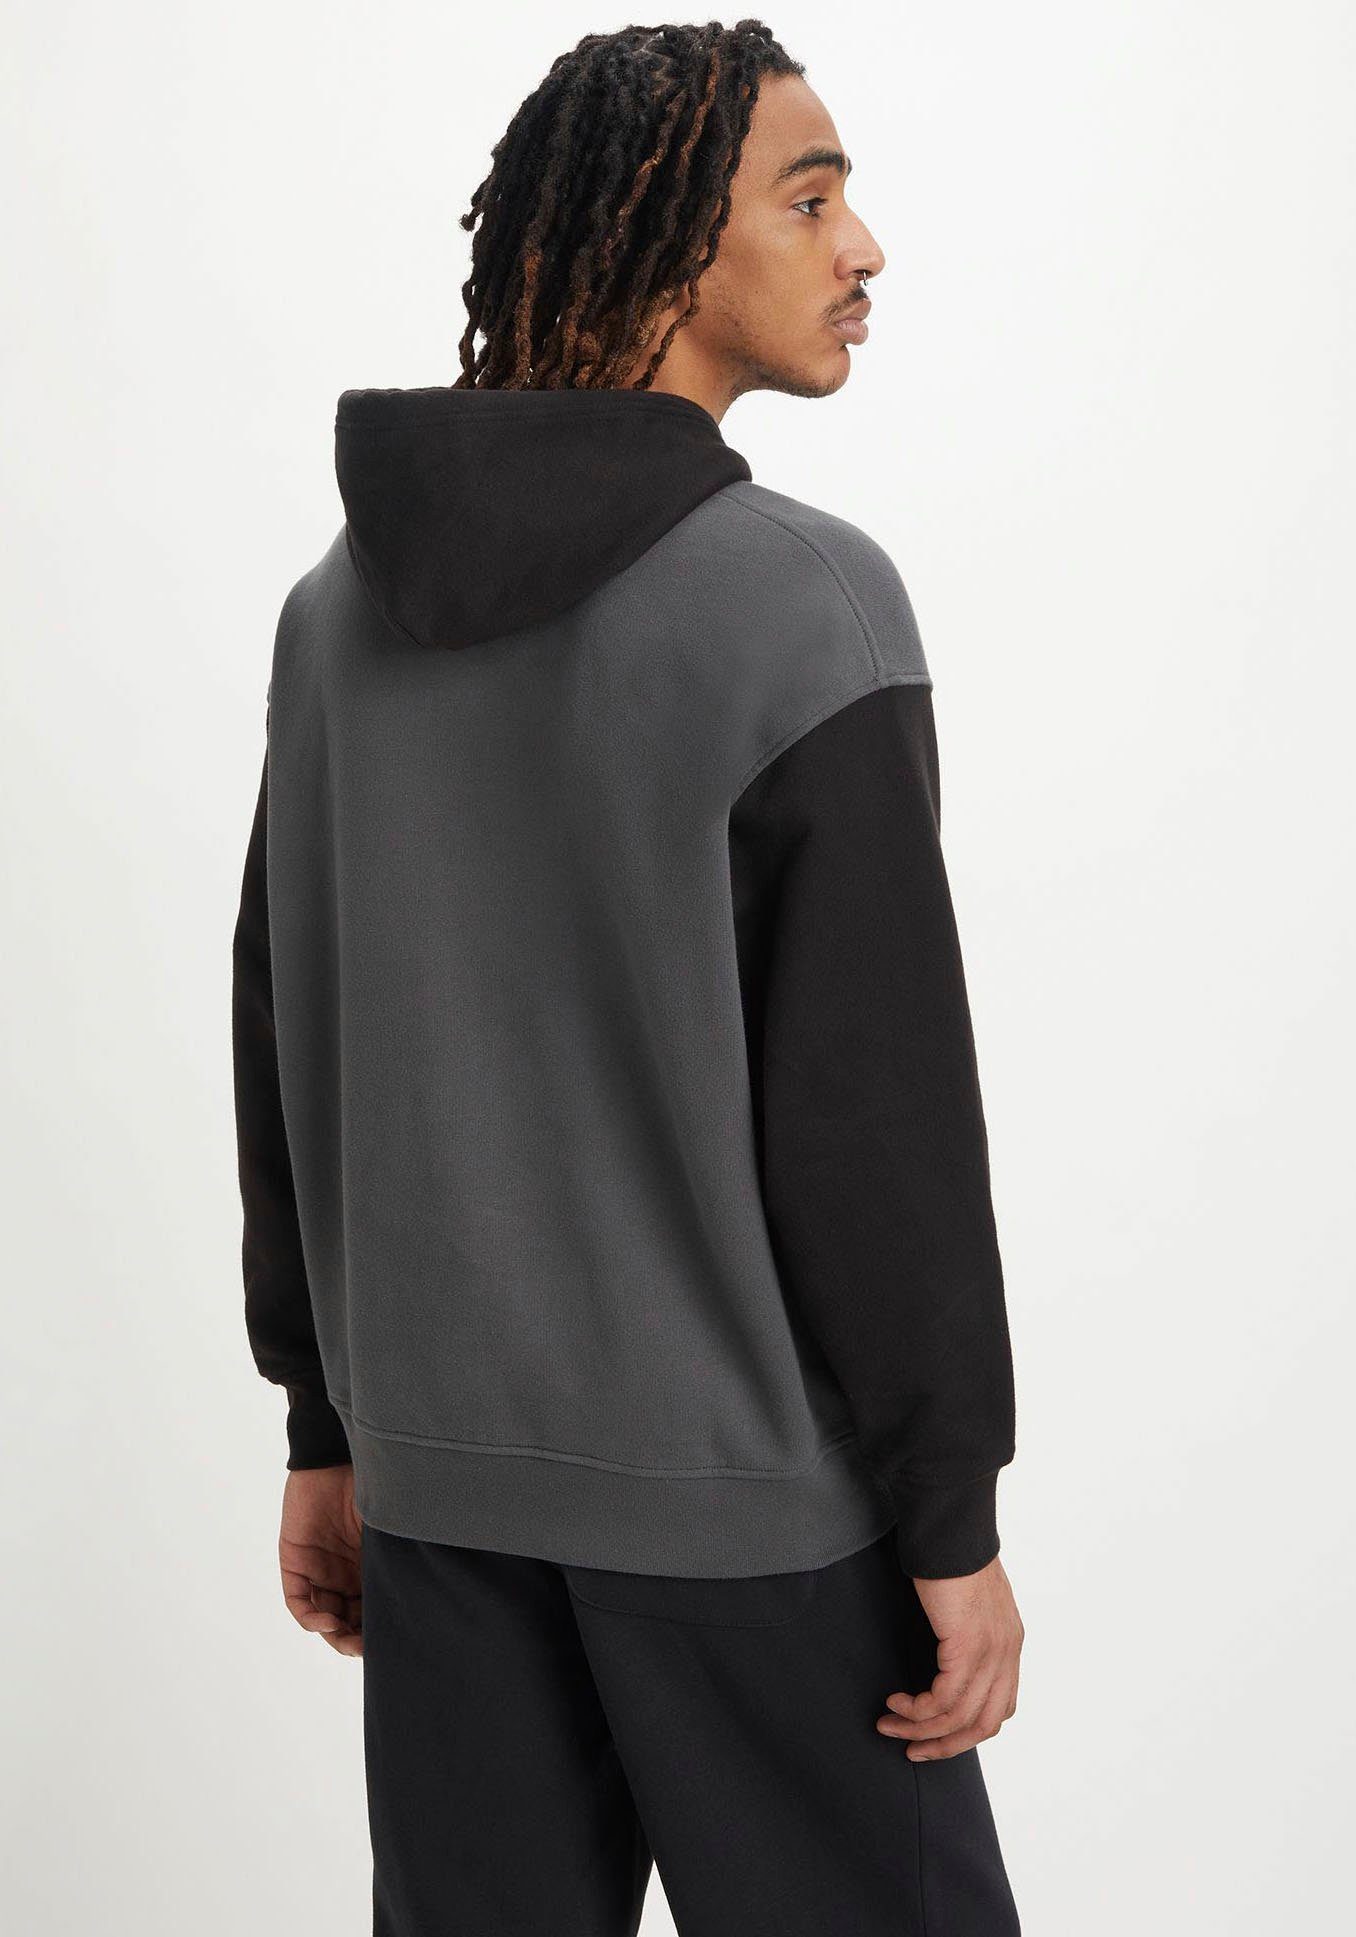 Hoodie RELAXED Levi's® GRAPHIC grau-schwarz